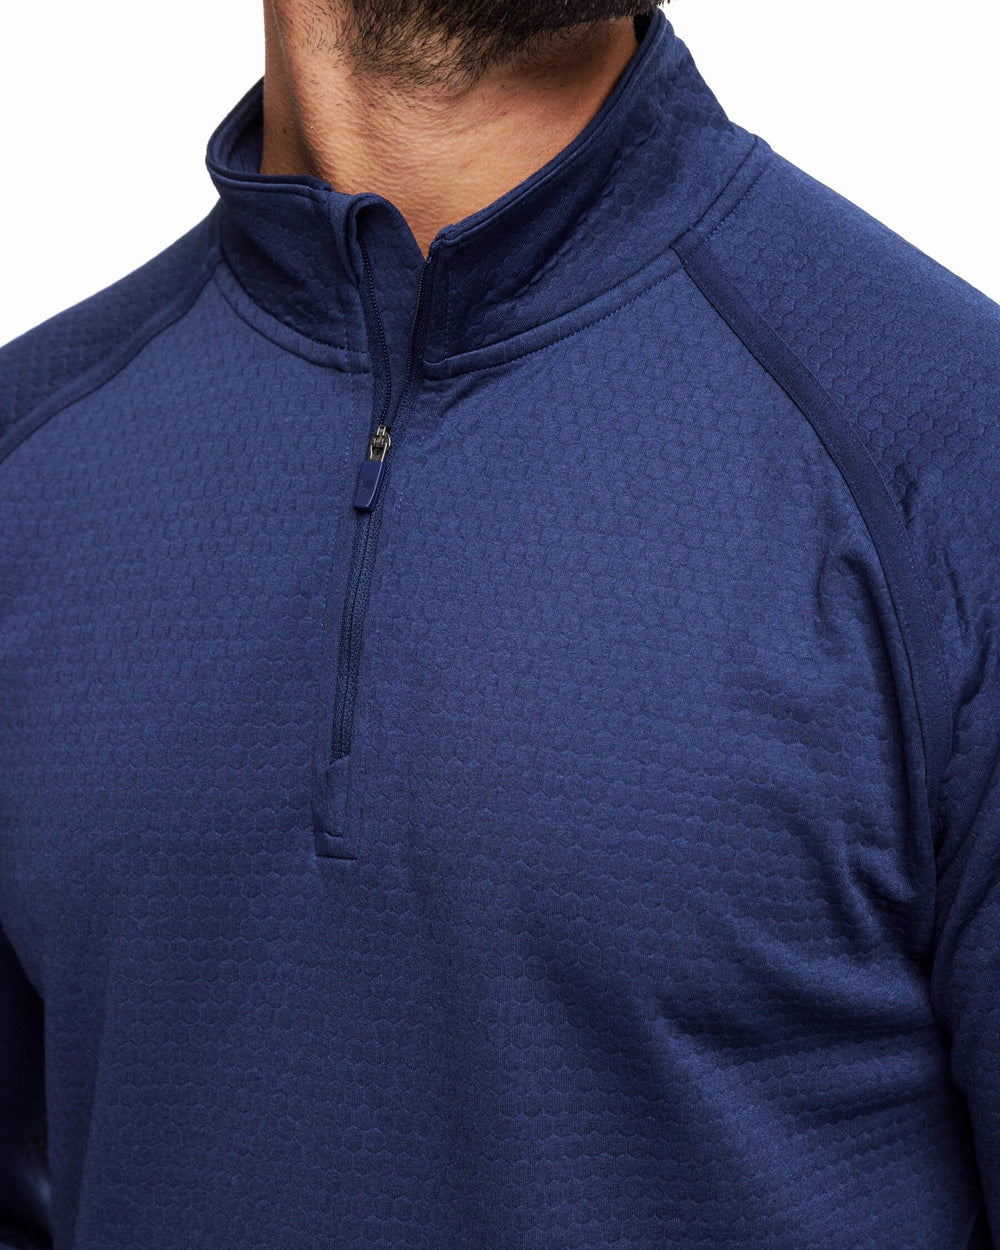 The detail view of the Southern Tide Scuttle Heather Quarter Zip Pullover by Southern Tide - Heather True Navy